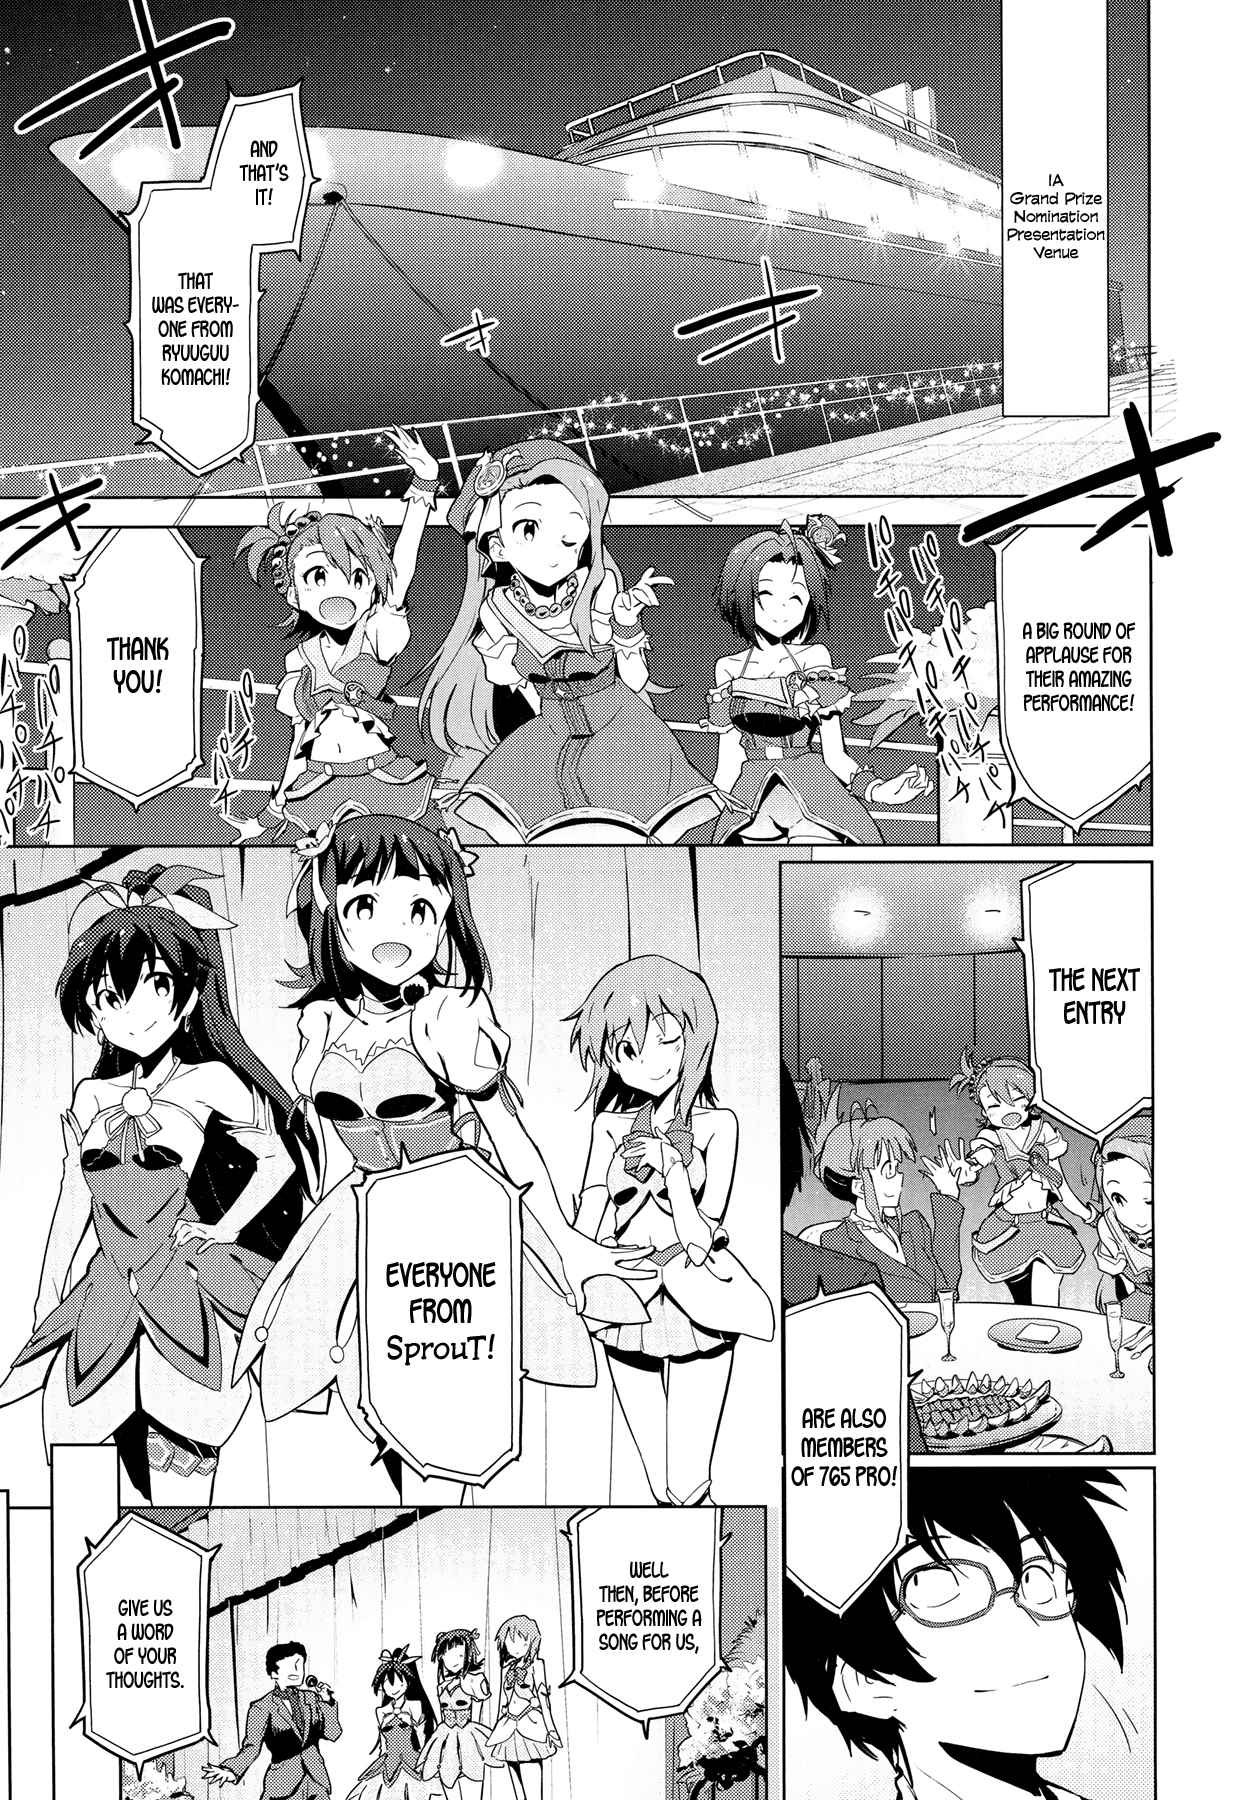 THE iDOLM@STER 2 The world is all one!! Vol. 4 Ch. 23 Smoky Deal